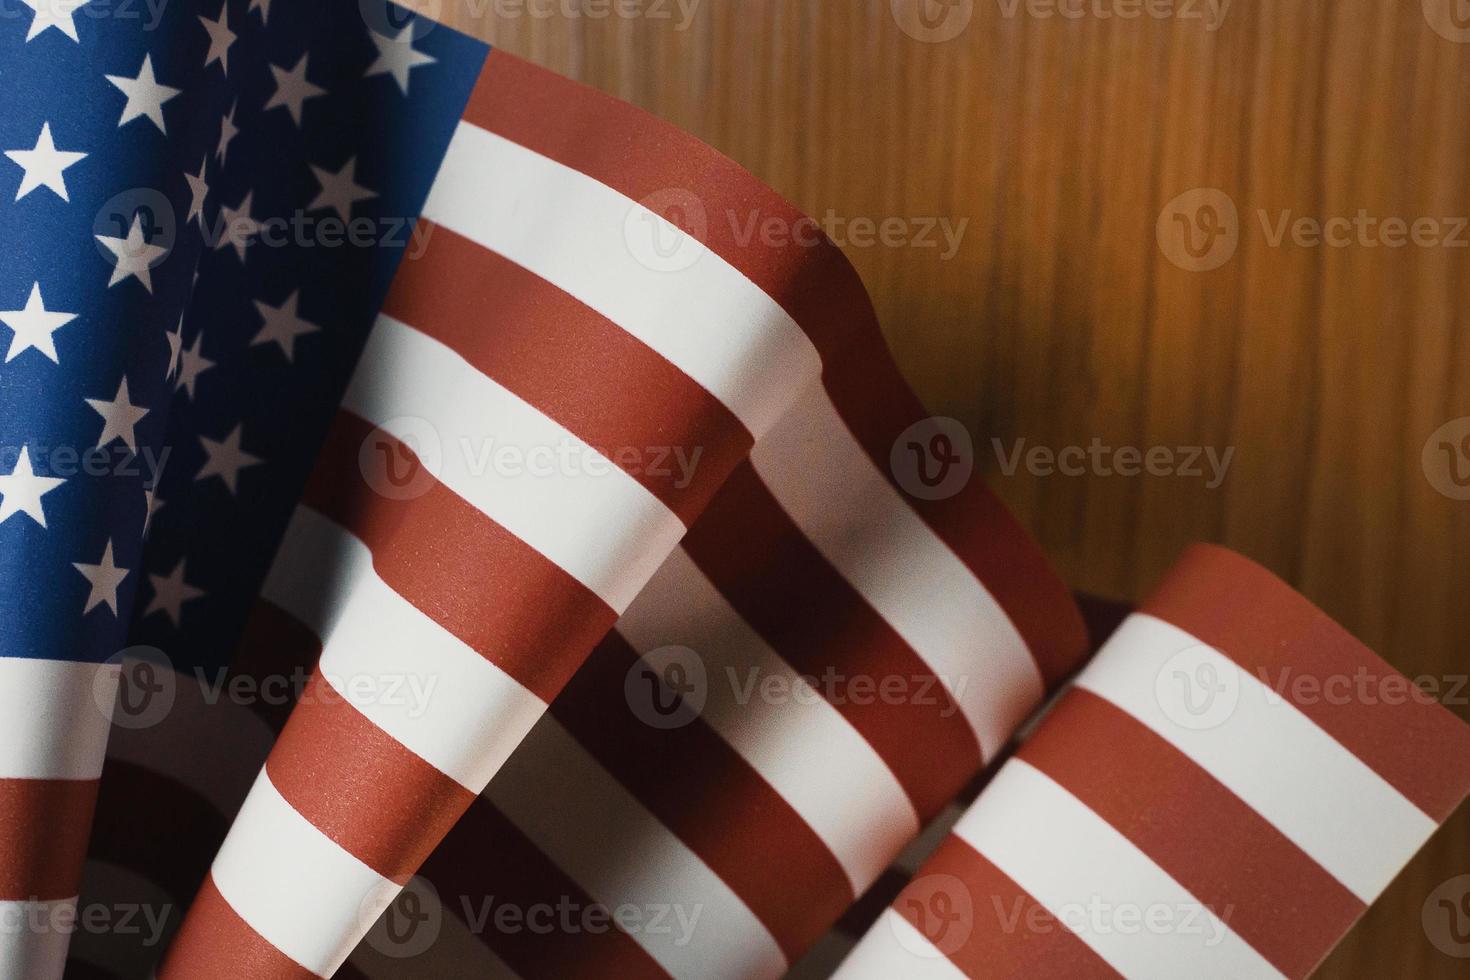 The Veterans Day  concept united states of America flag on wood background. photo